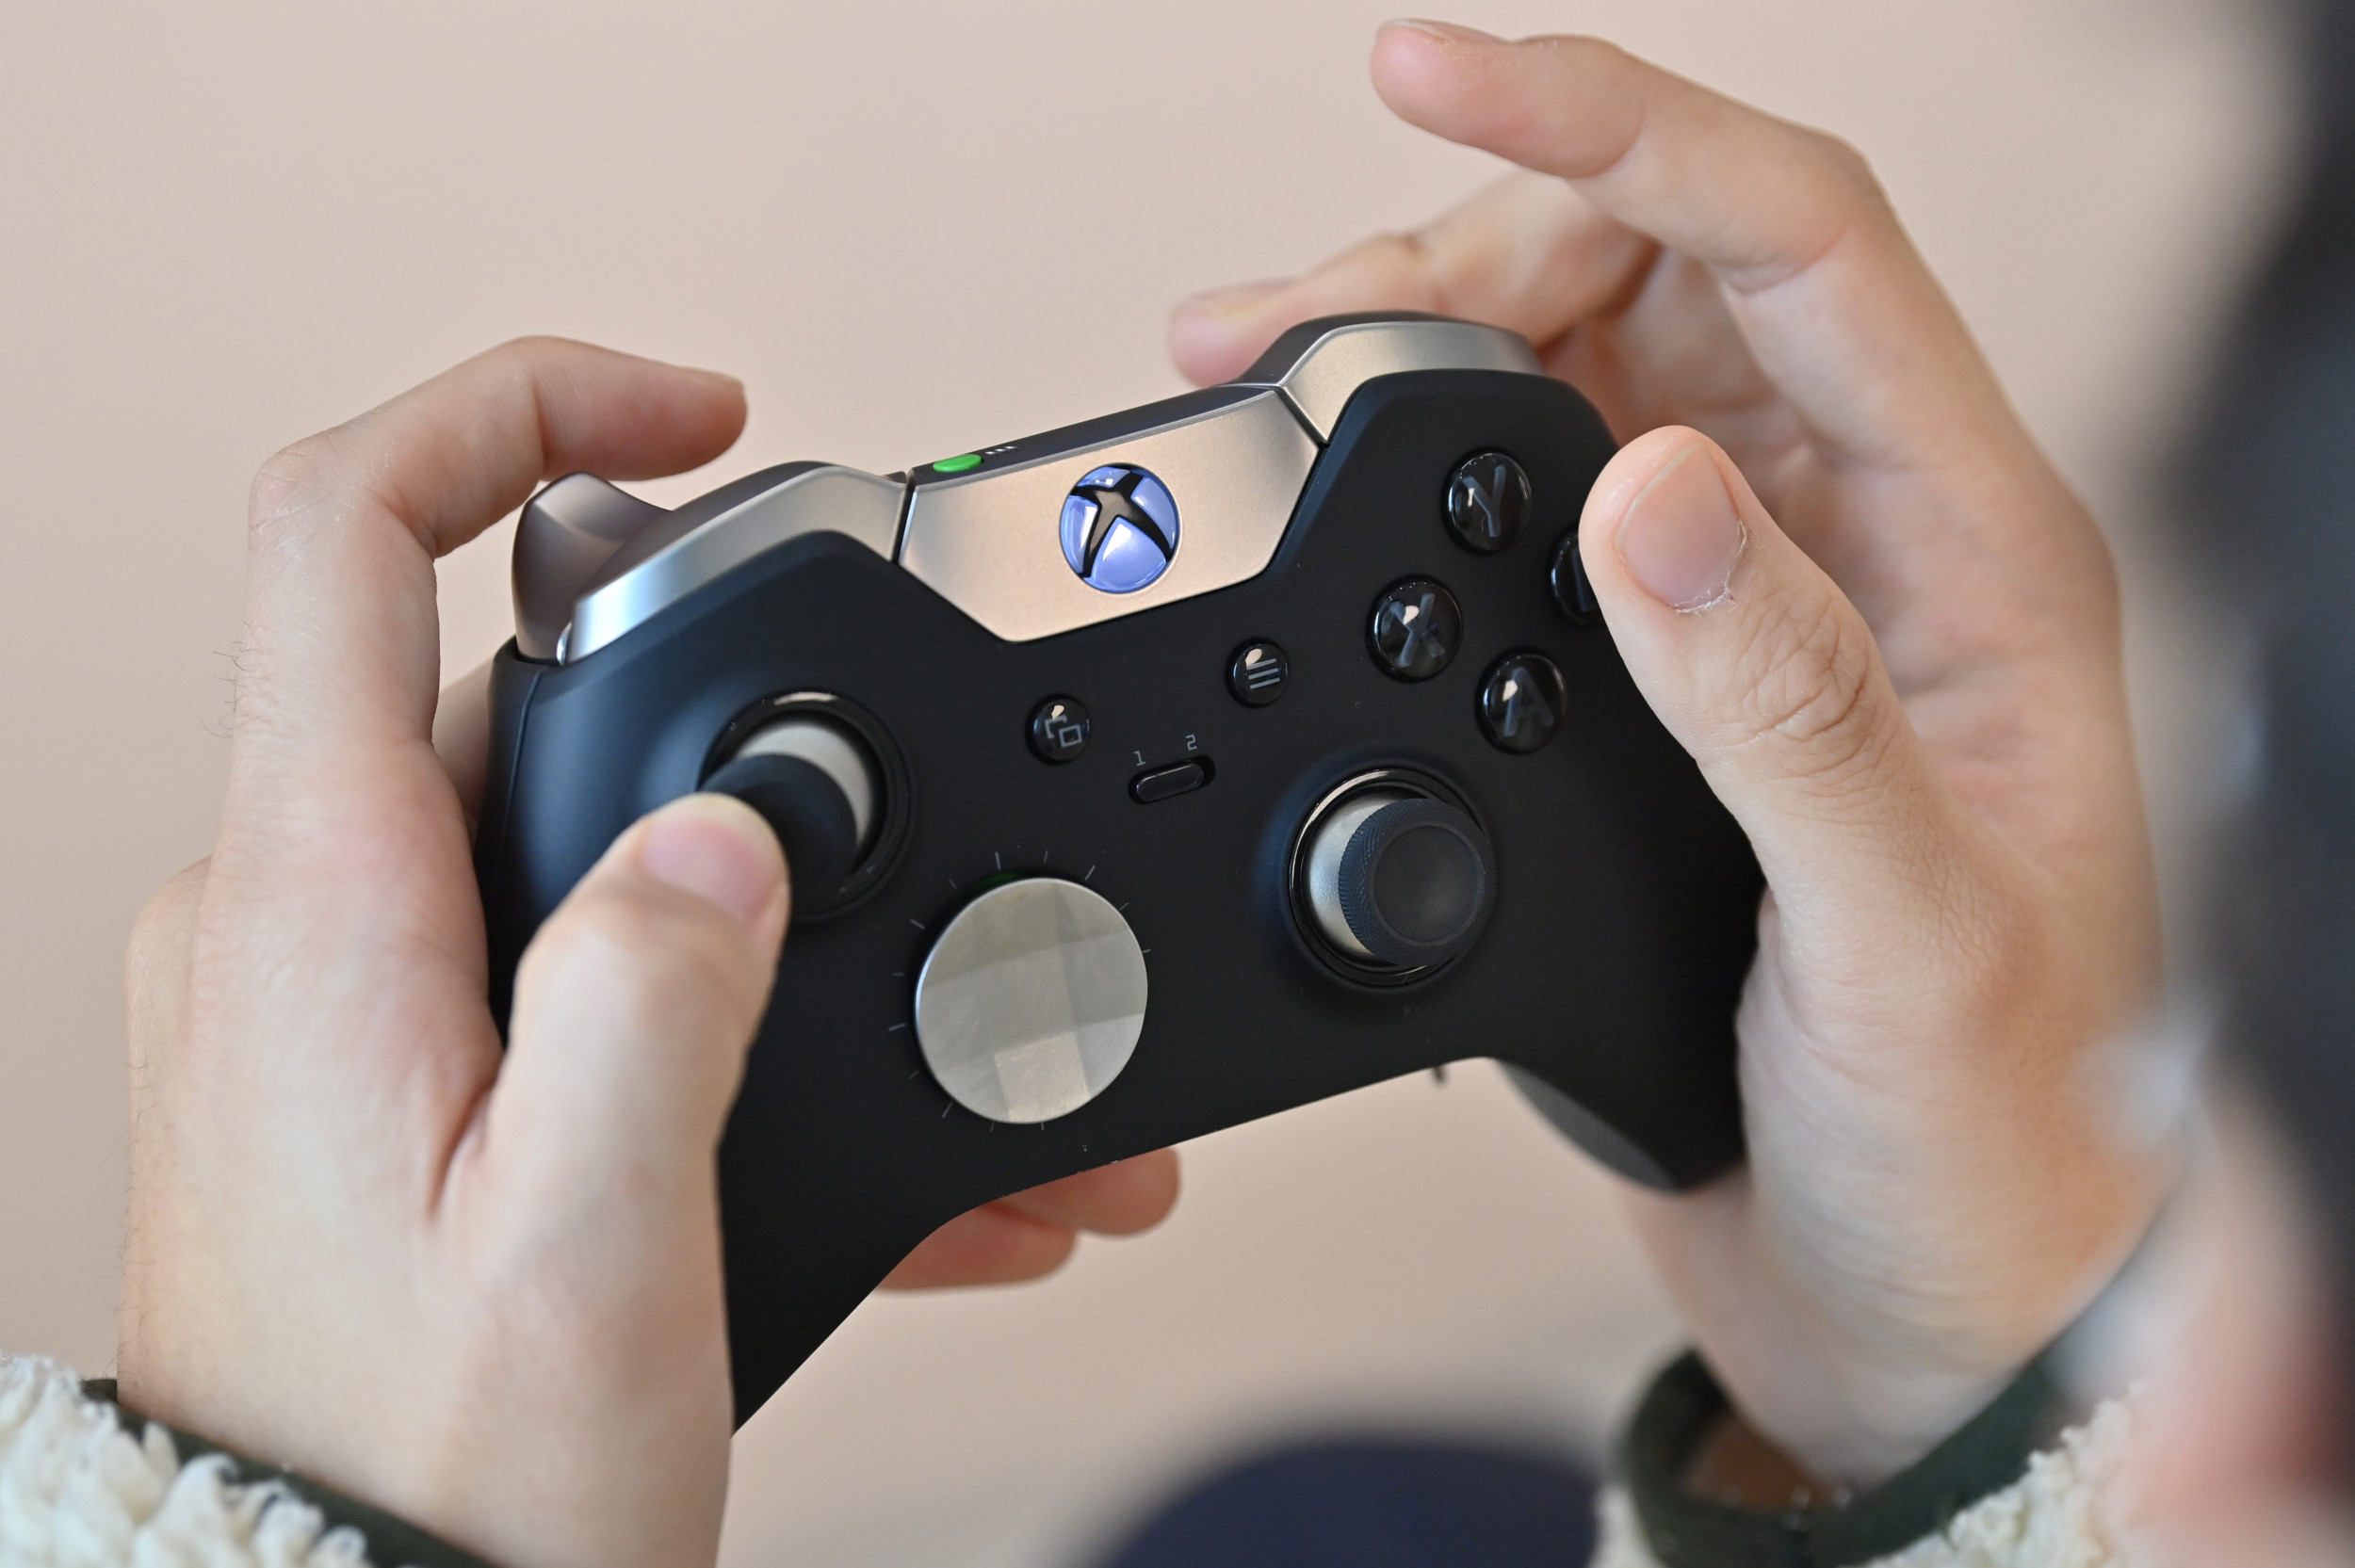 Wired Vs. Wireless Game Controller: Which One Is the Best?